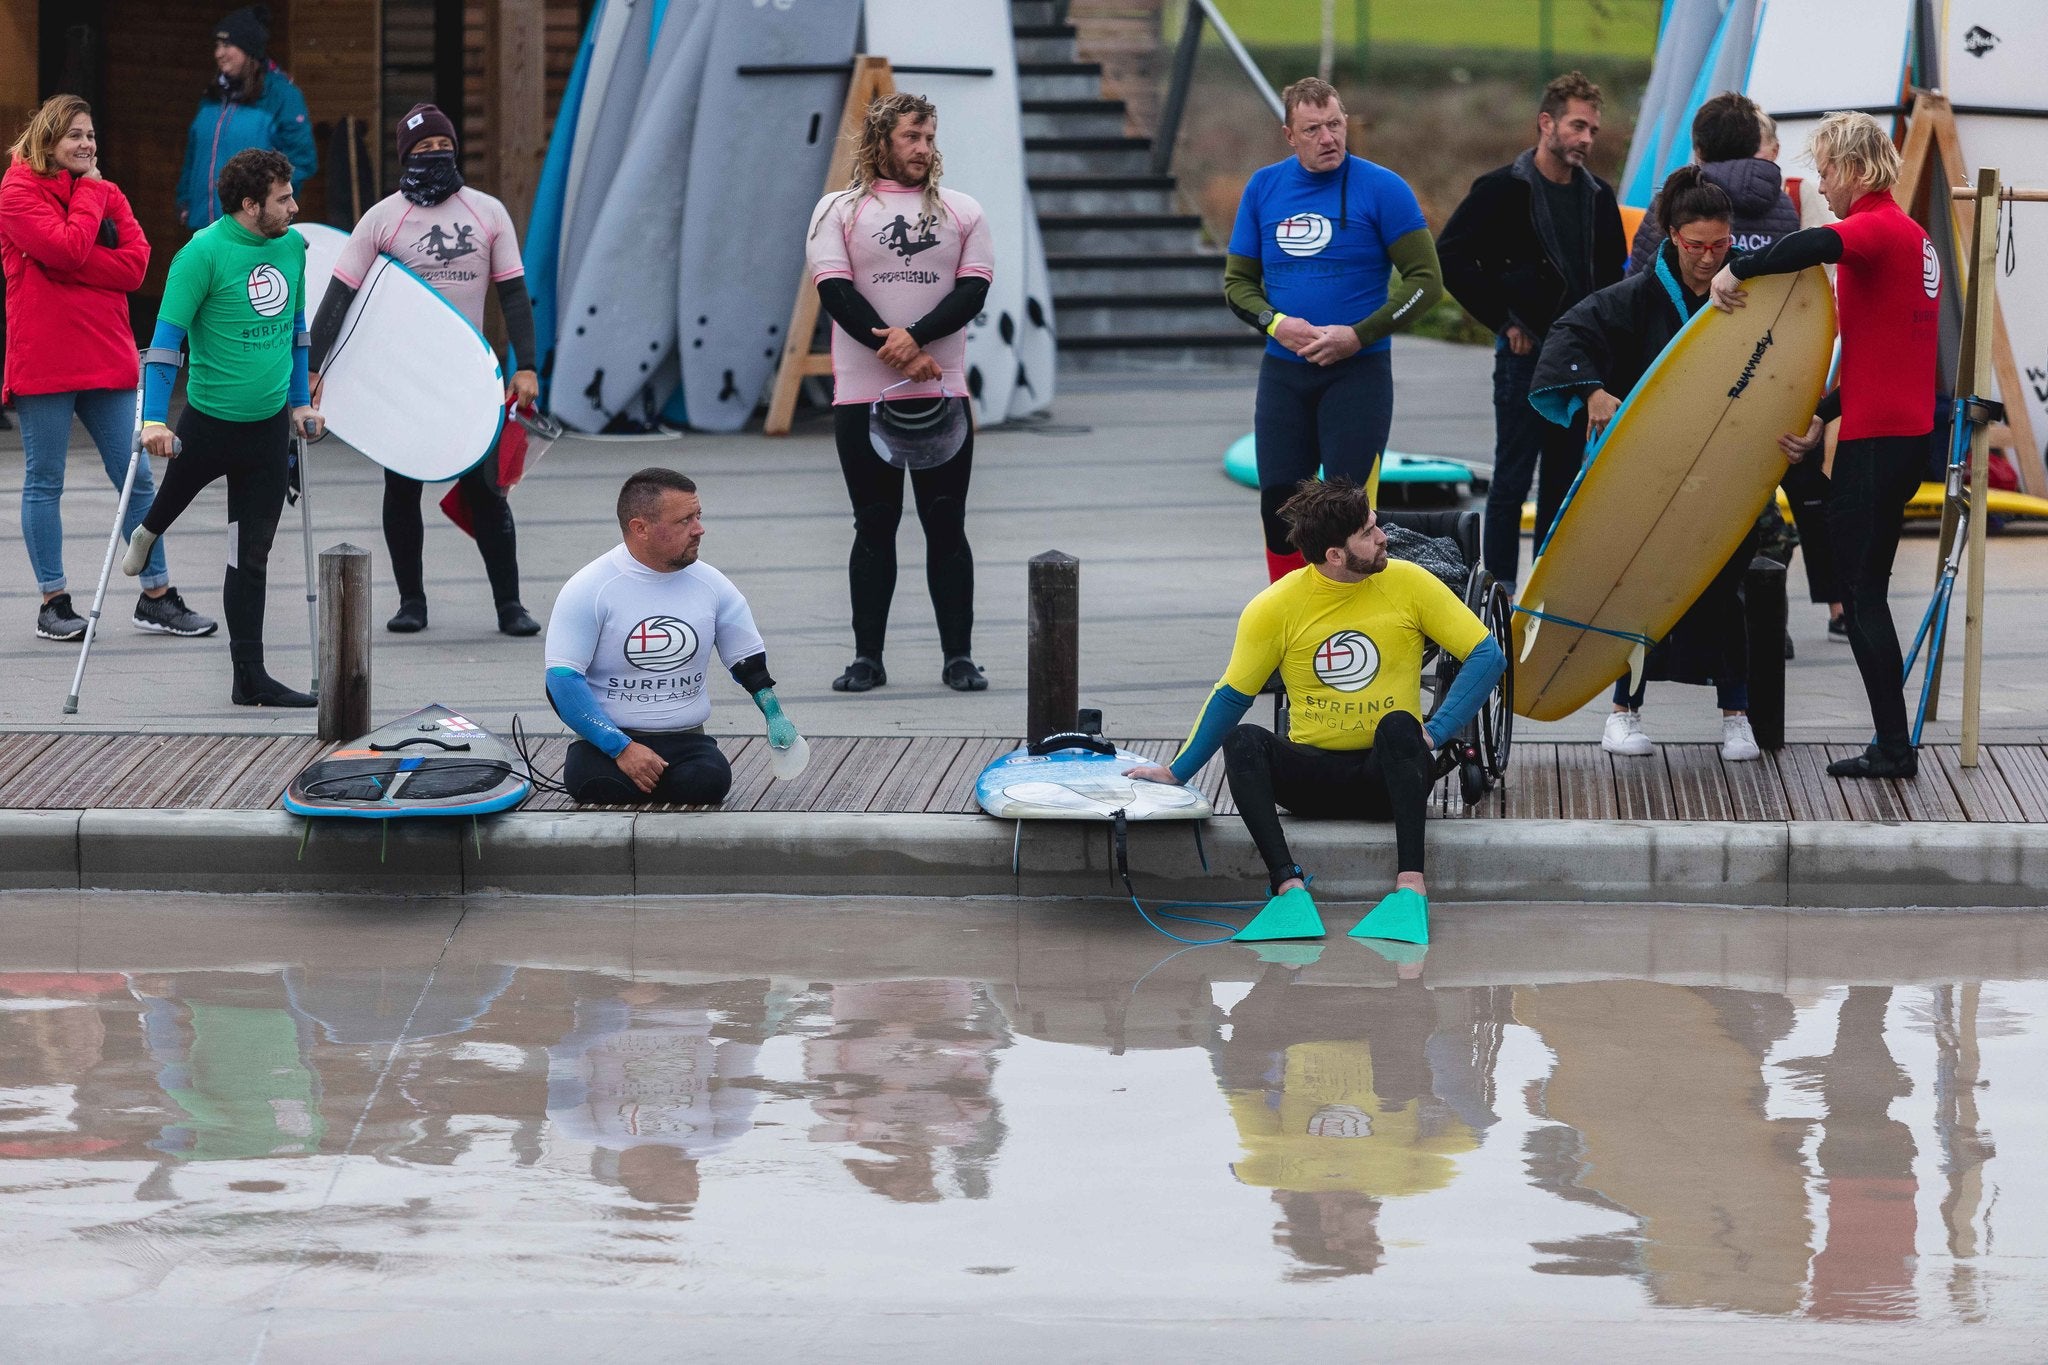 Competitors waiting to surf at the 2020 English Adaptive Surf Open